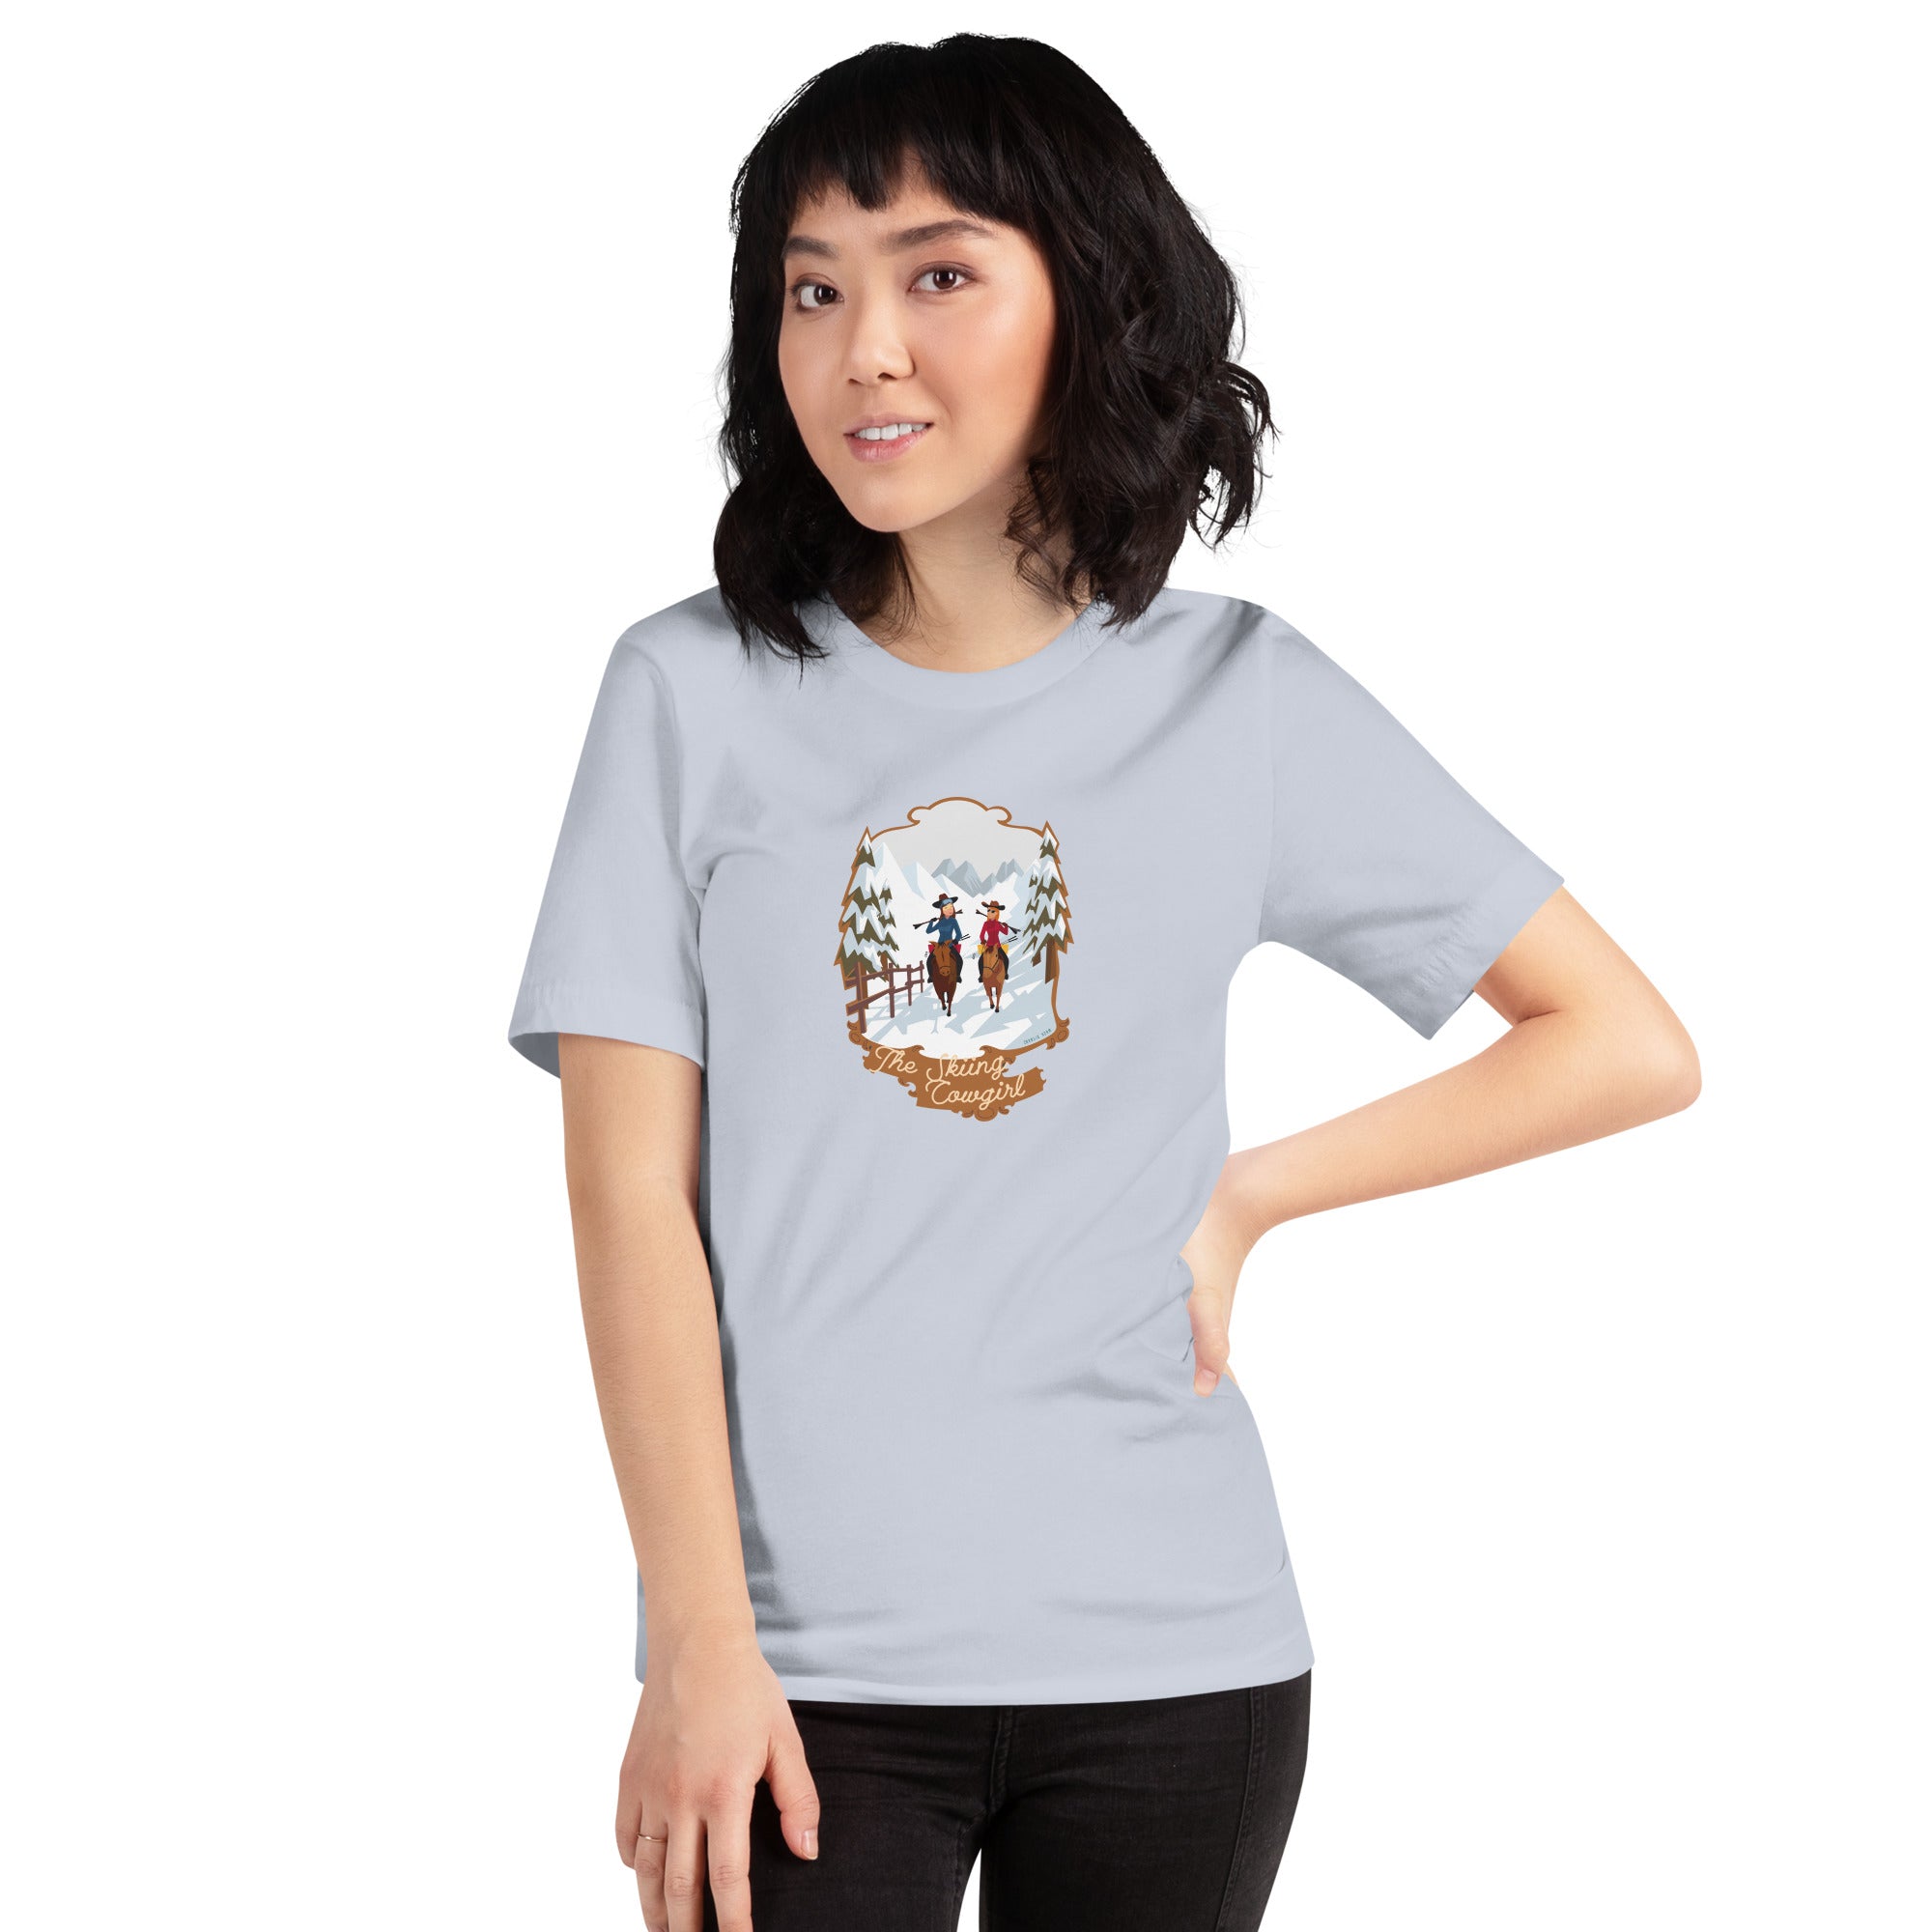 Unisex cotton t-shirt The Skiing Cowgirl on light colors